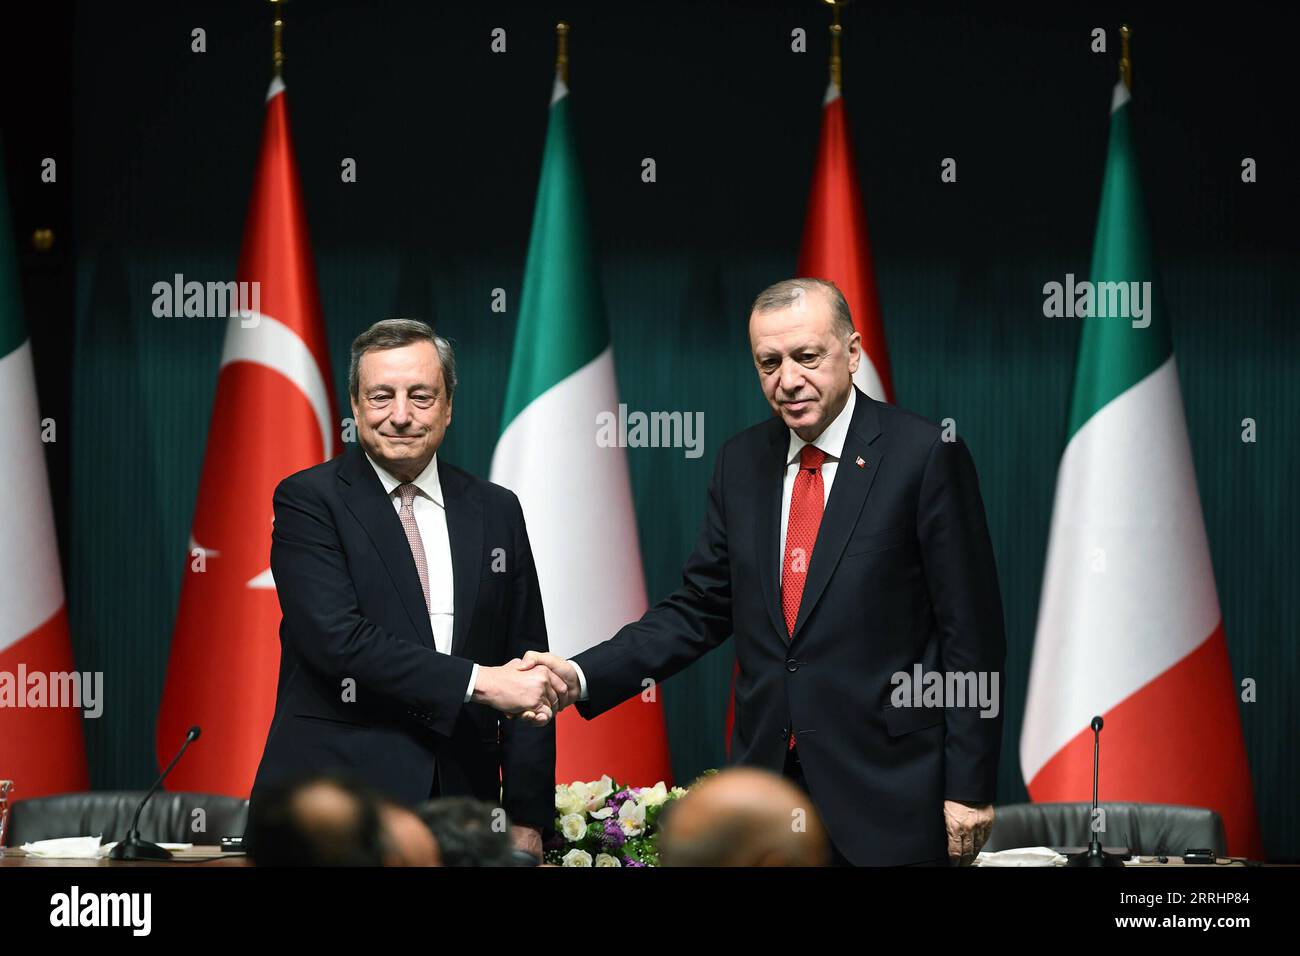 220705 -- ANKARA, July 5, 2022 -- Turkish President Recep Tayyip Erdogan R shakes hands with Italian Prime Minister Mario Draghi at a joint press conference in Ankara, Turkey, on July 5, 2022. Turkish President Recep Tayyip Erdogan vowed to enhance economic cooperation with Italy, particularly in the fields of energy and defense. Erdogan made the remarks after he held the third intergovernmental meeting with Italian Prime Minister Mario Draghi in Ankara, where the two countries signed nine new agreements on bilateral cooperation. Photo by /Xinhua TURKEY-ANKARA-ITALY-PM-VISIT MustafaxKaya PUBLI Stock Photo